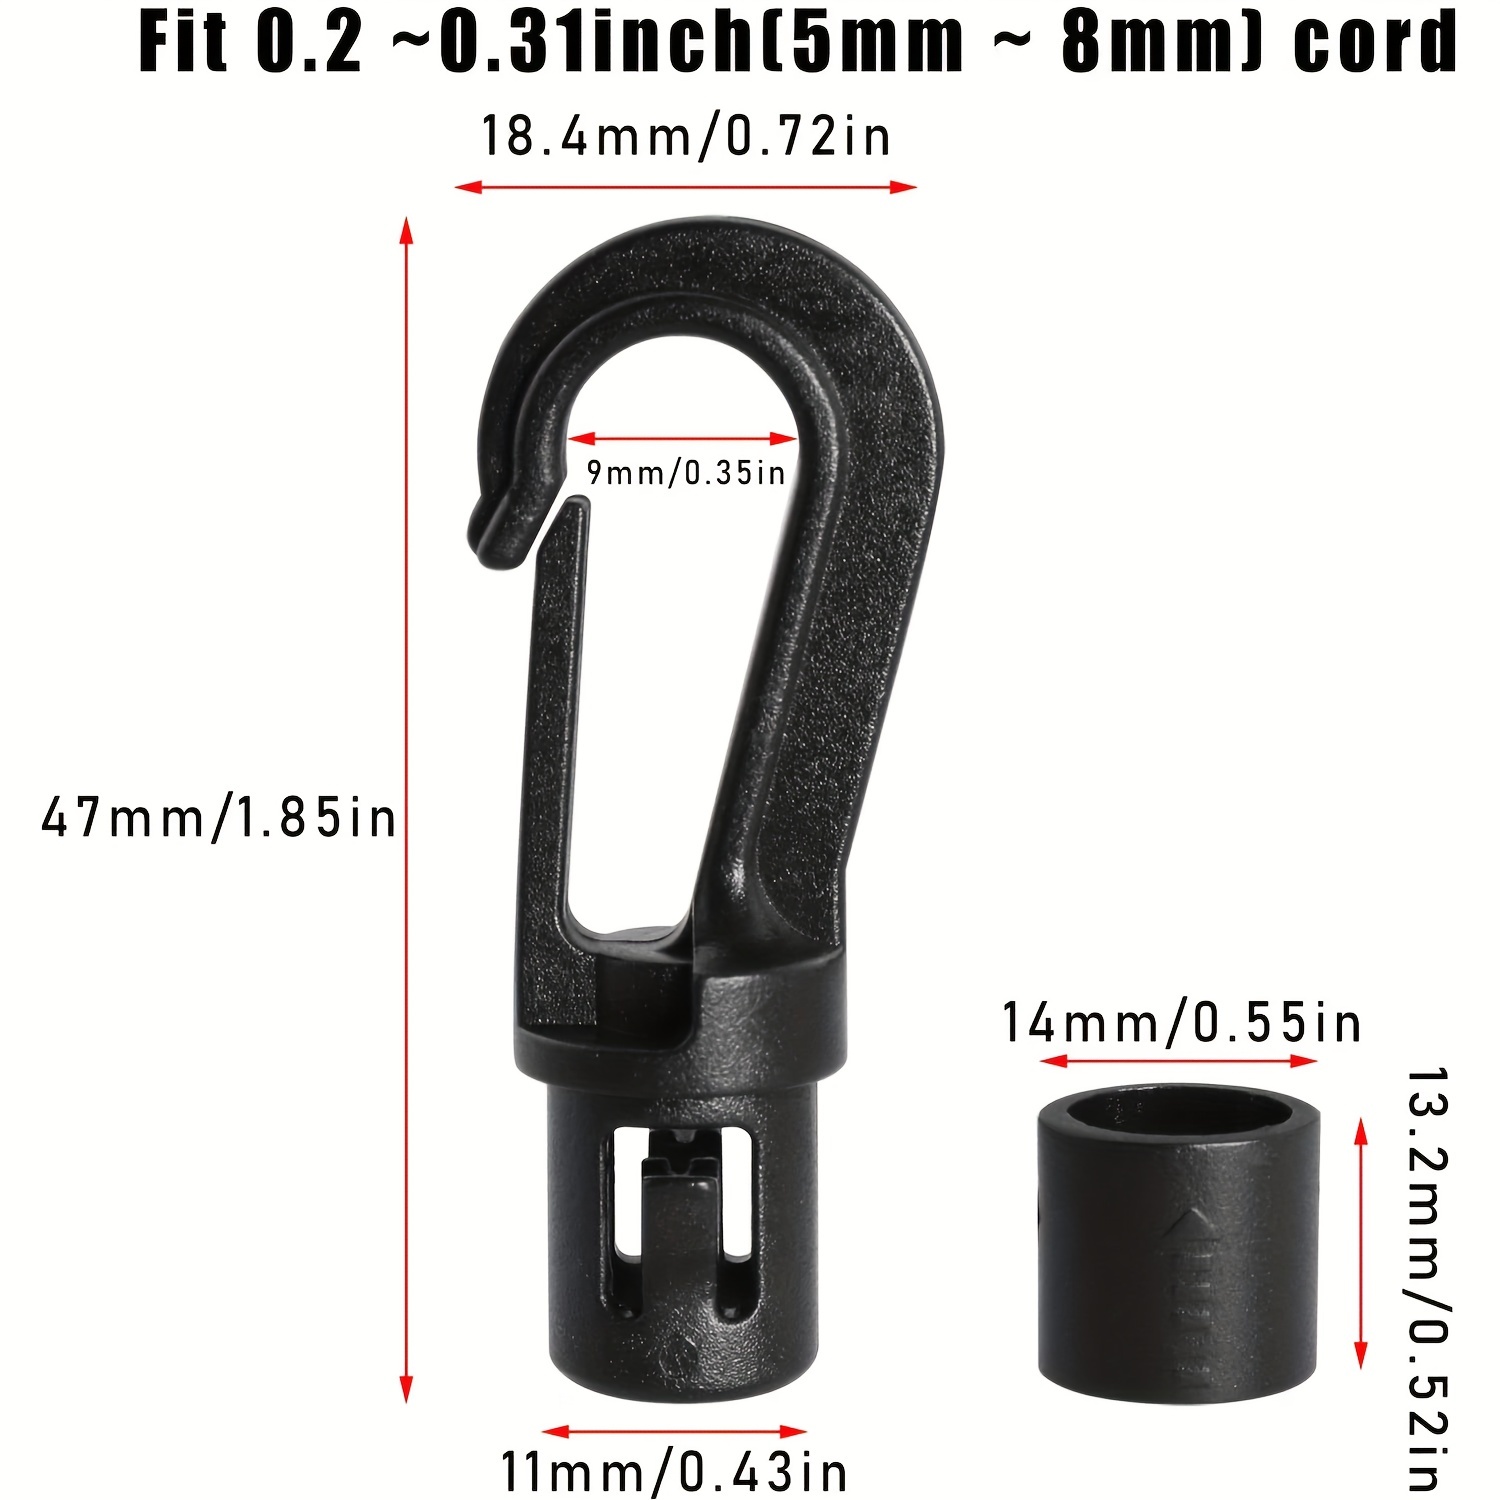 BUNGEE CORD (5/16) - LOOPED END PICK A HOOK STANDARD DUTY (#9005) USA MADE  (BY THE INCH) LOOP END TO LOOP END